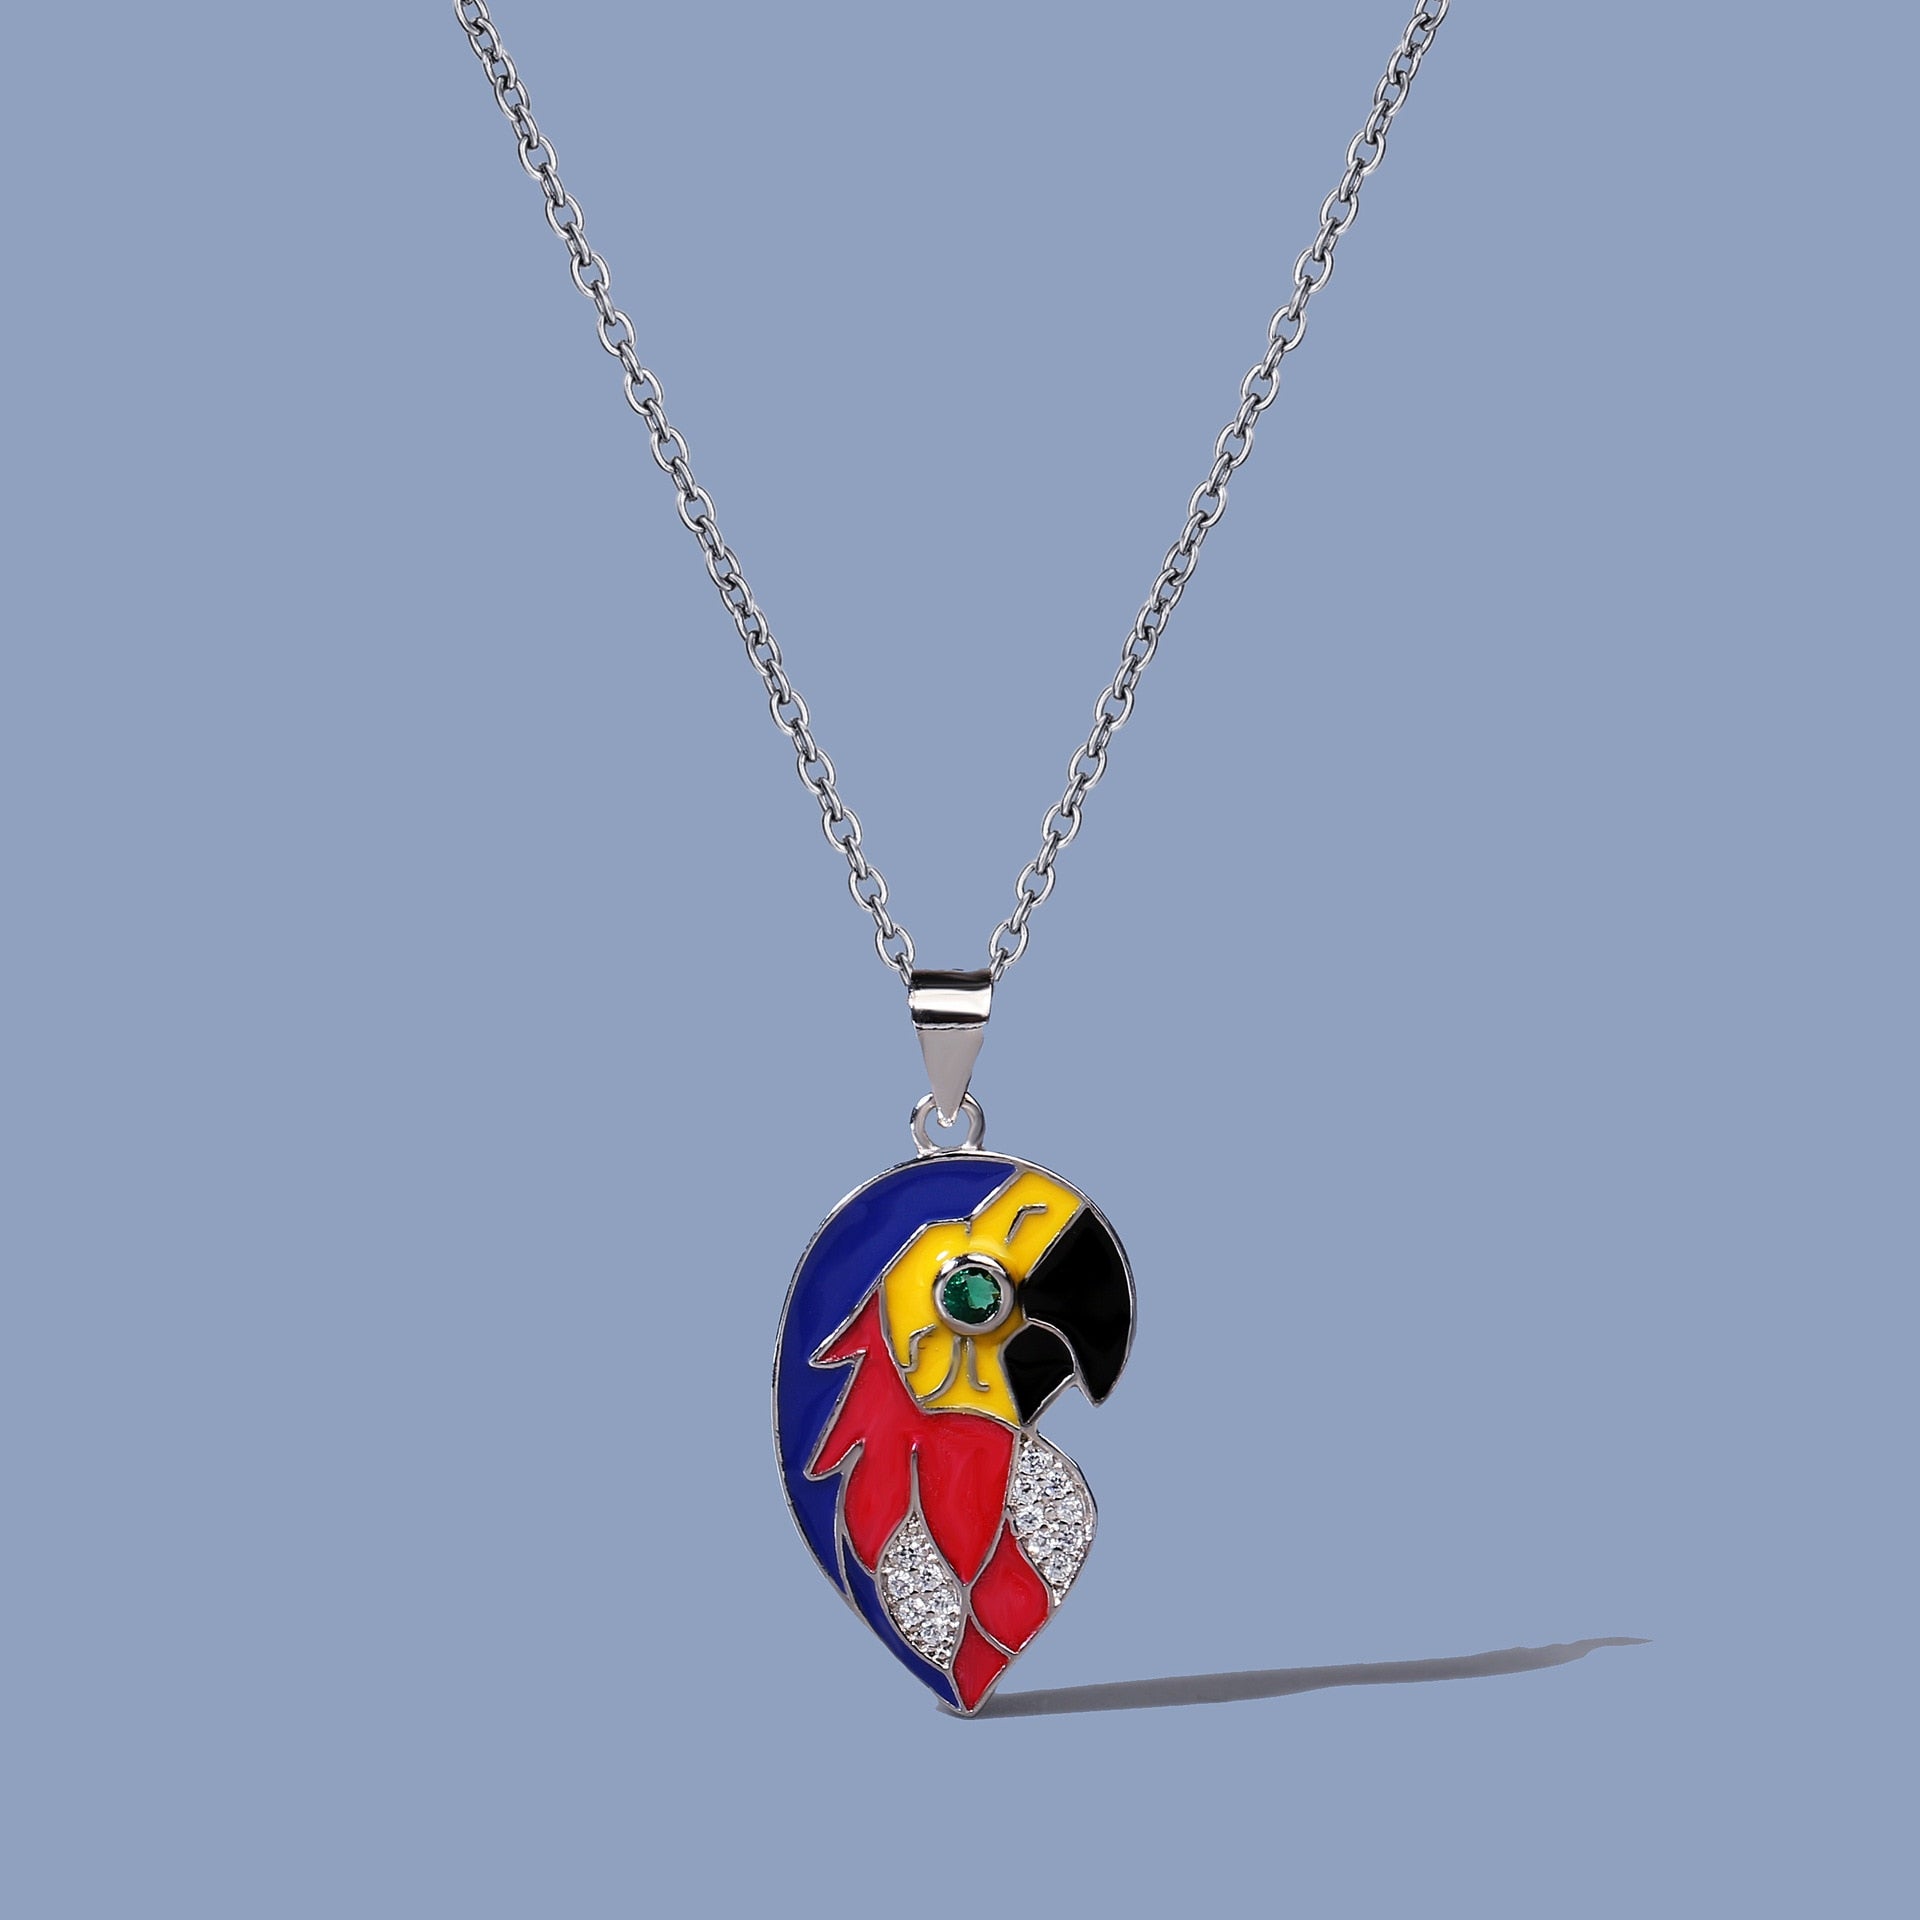 Parrot Pendant Necklace for Women with Handmade Enamel in 925 Silver